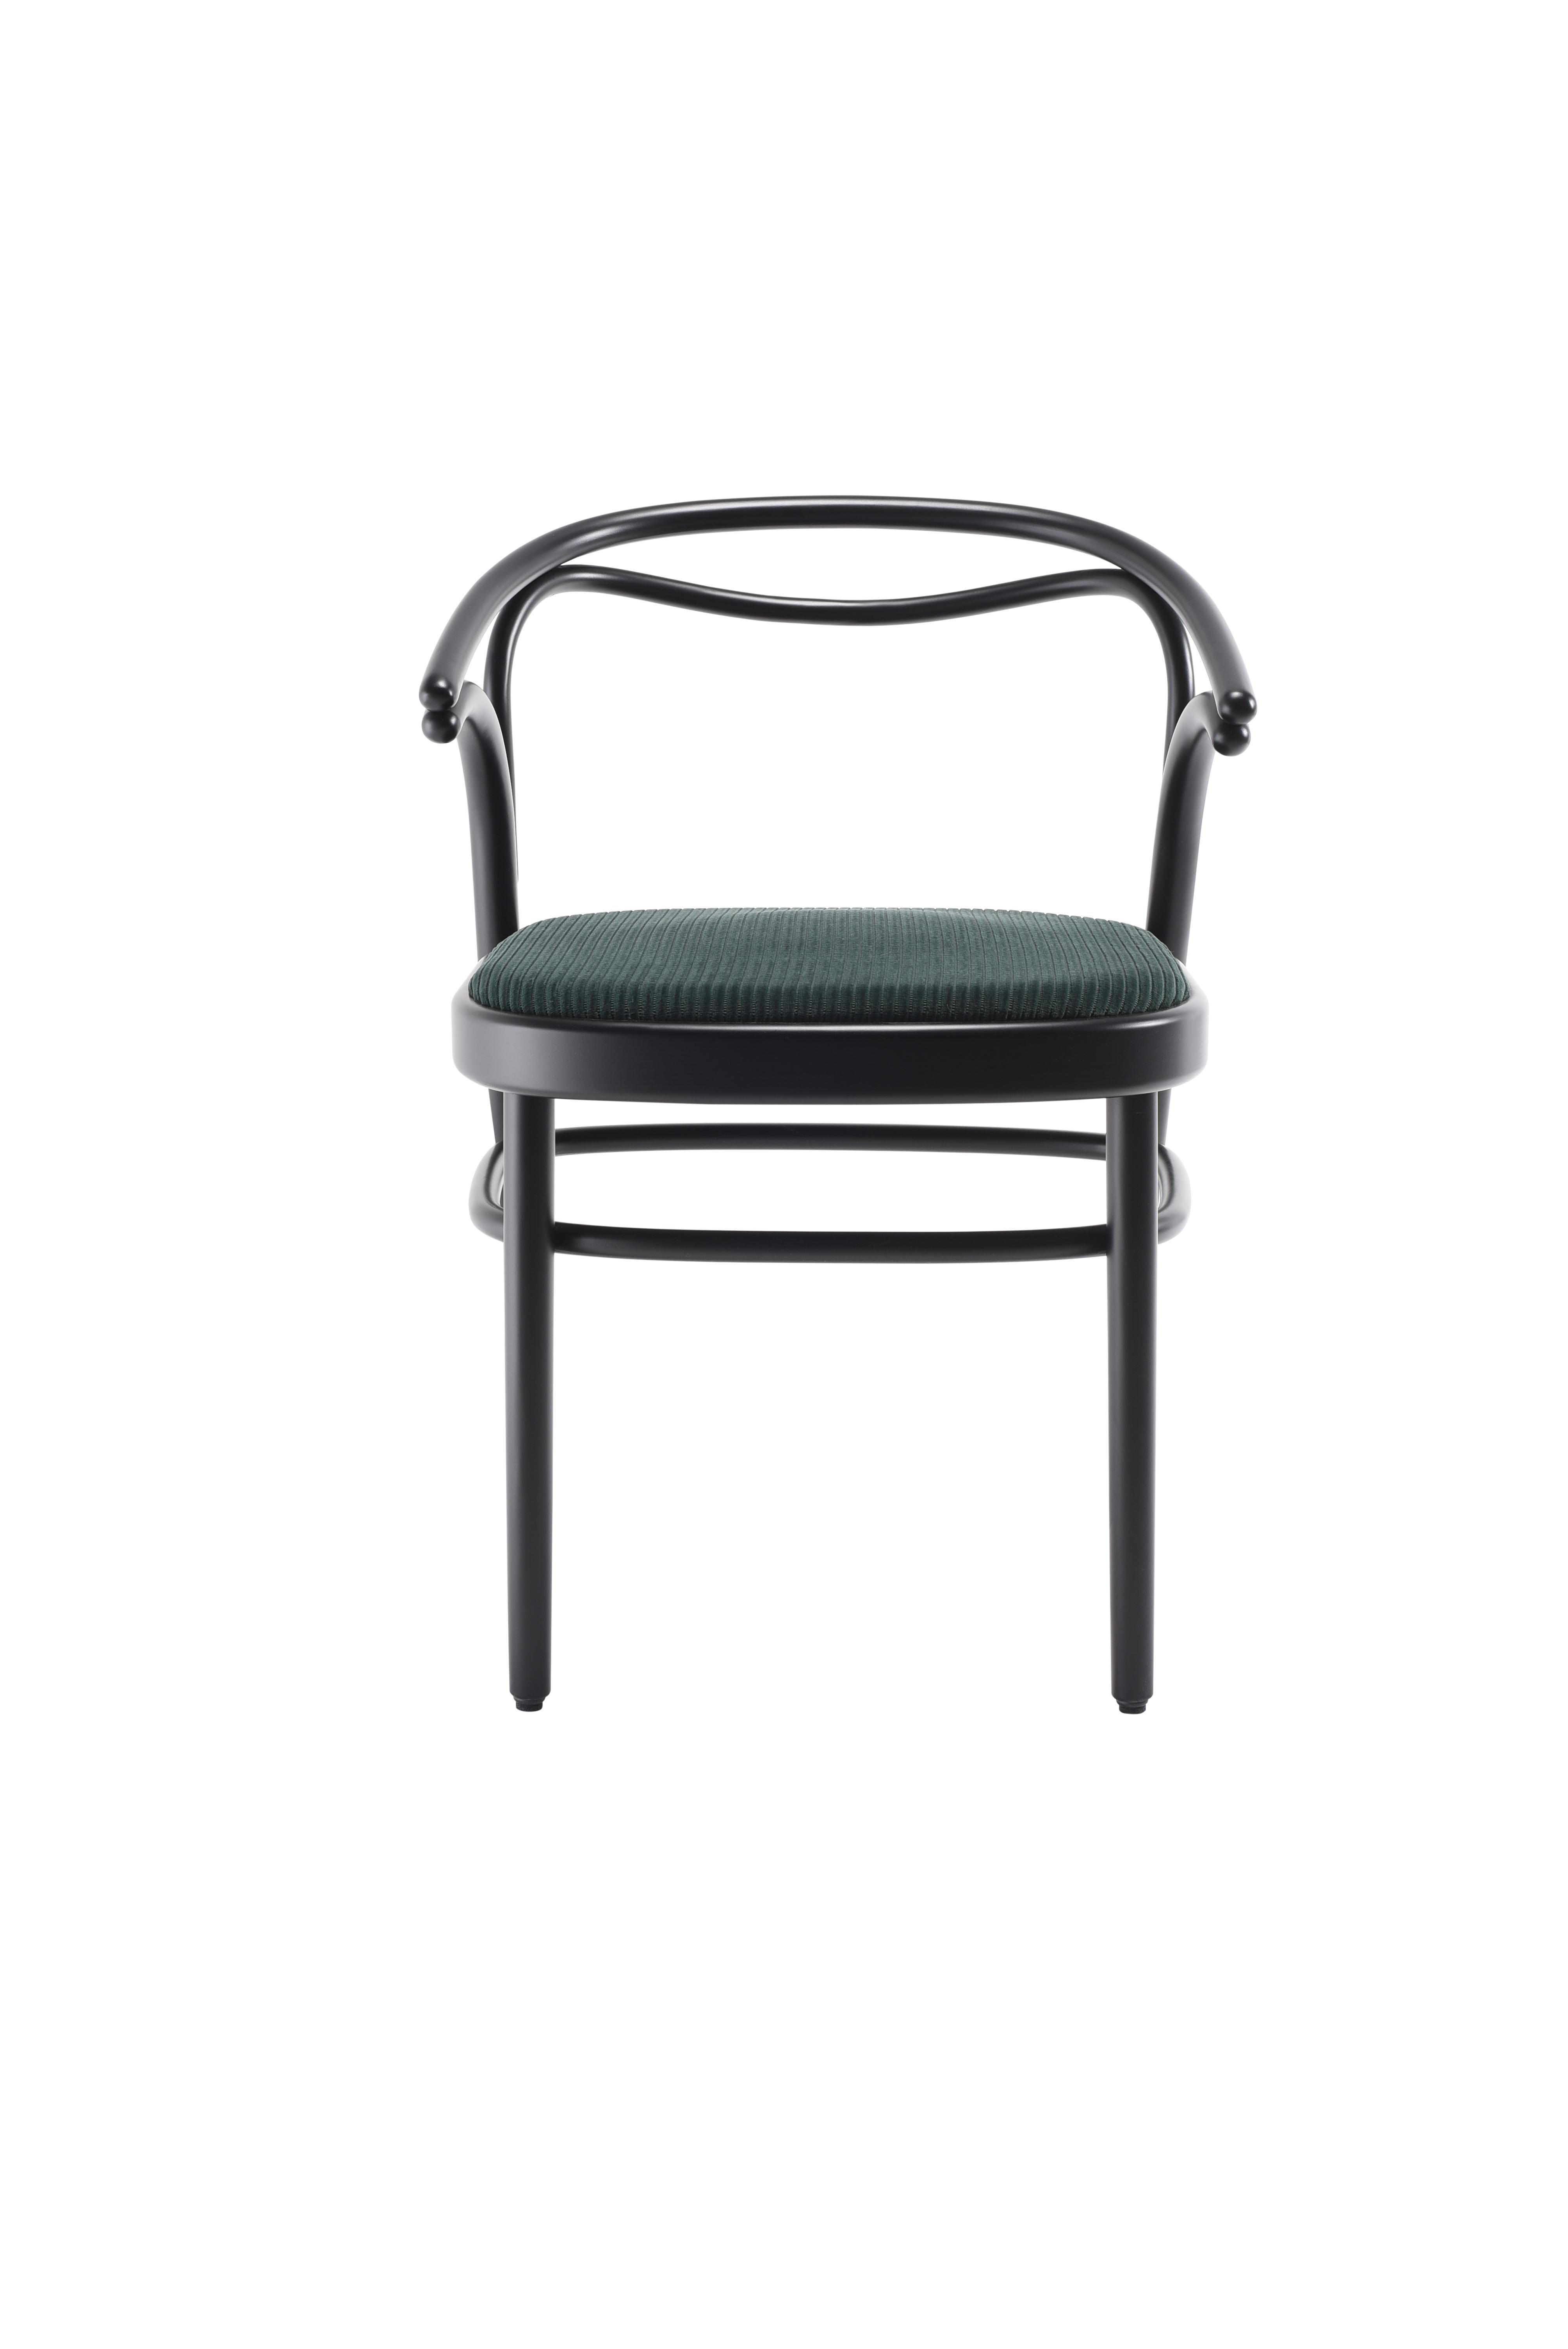 Wood Gebrüder Thonet Vienna Beaulieu Armchair with Upholstered Seat by Philippe Nigro For Sale